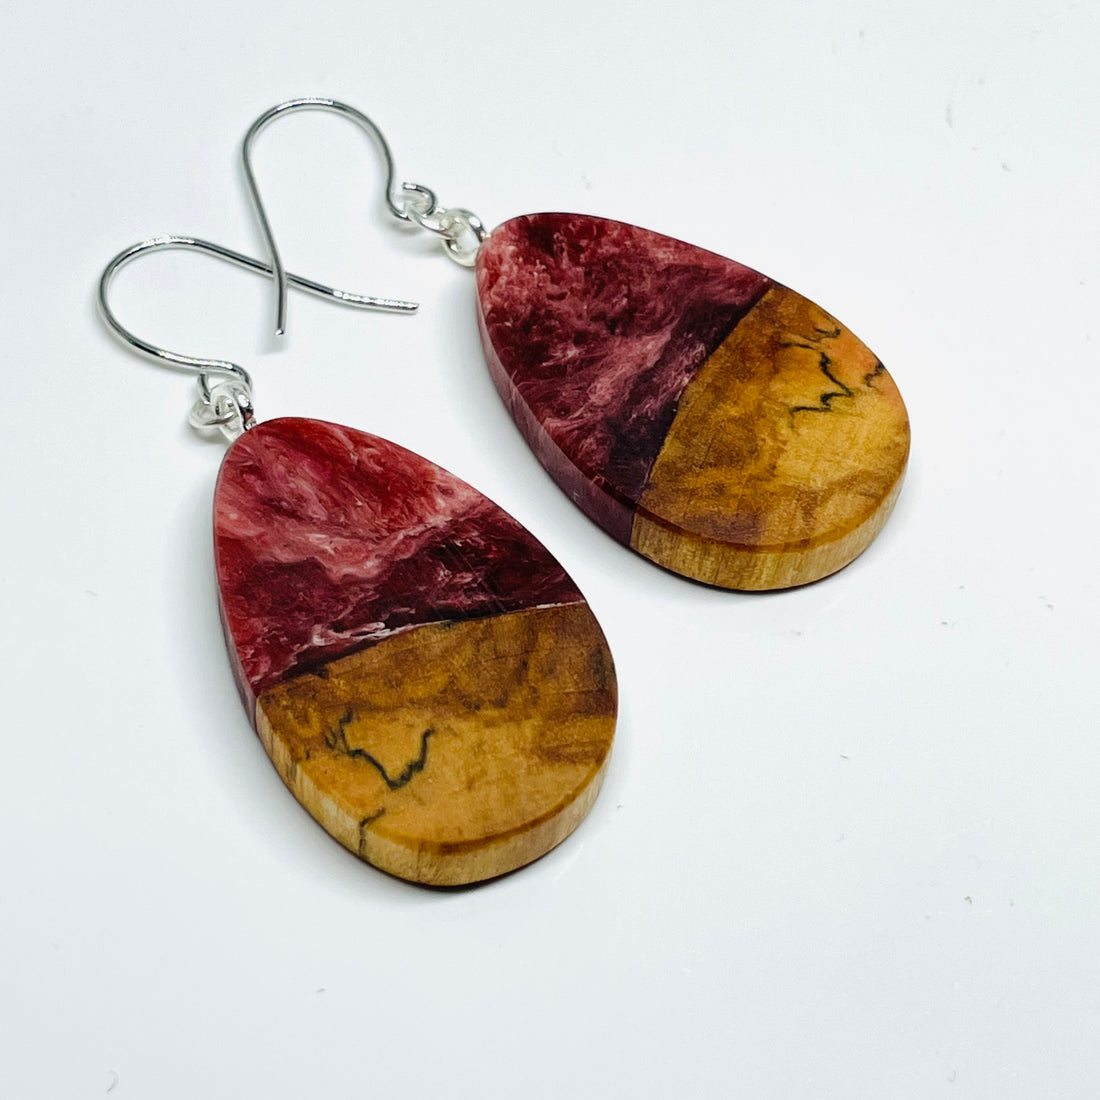 handmade jewelry, Minnesota local wood and resin artist. Deep red and white swirled resin with spalted spalted maple wood, nickel free dangle earrings teardrop shaped